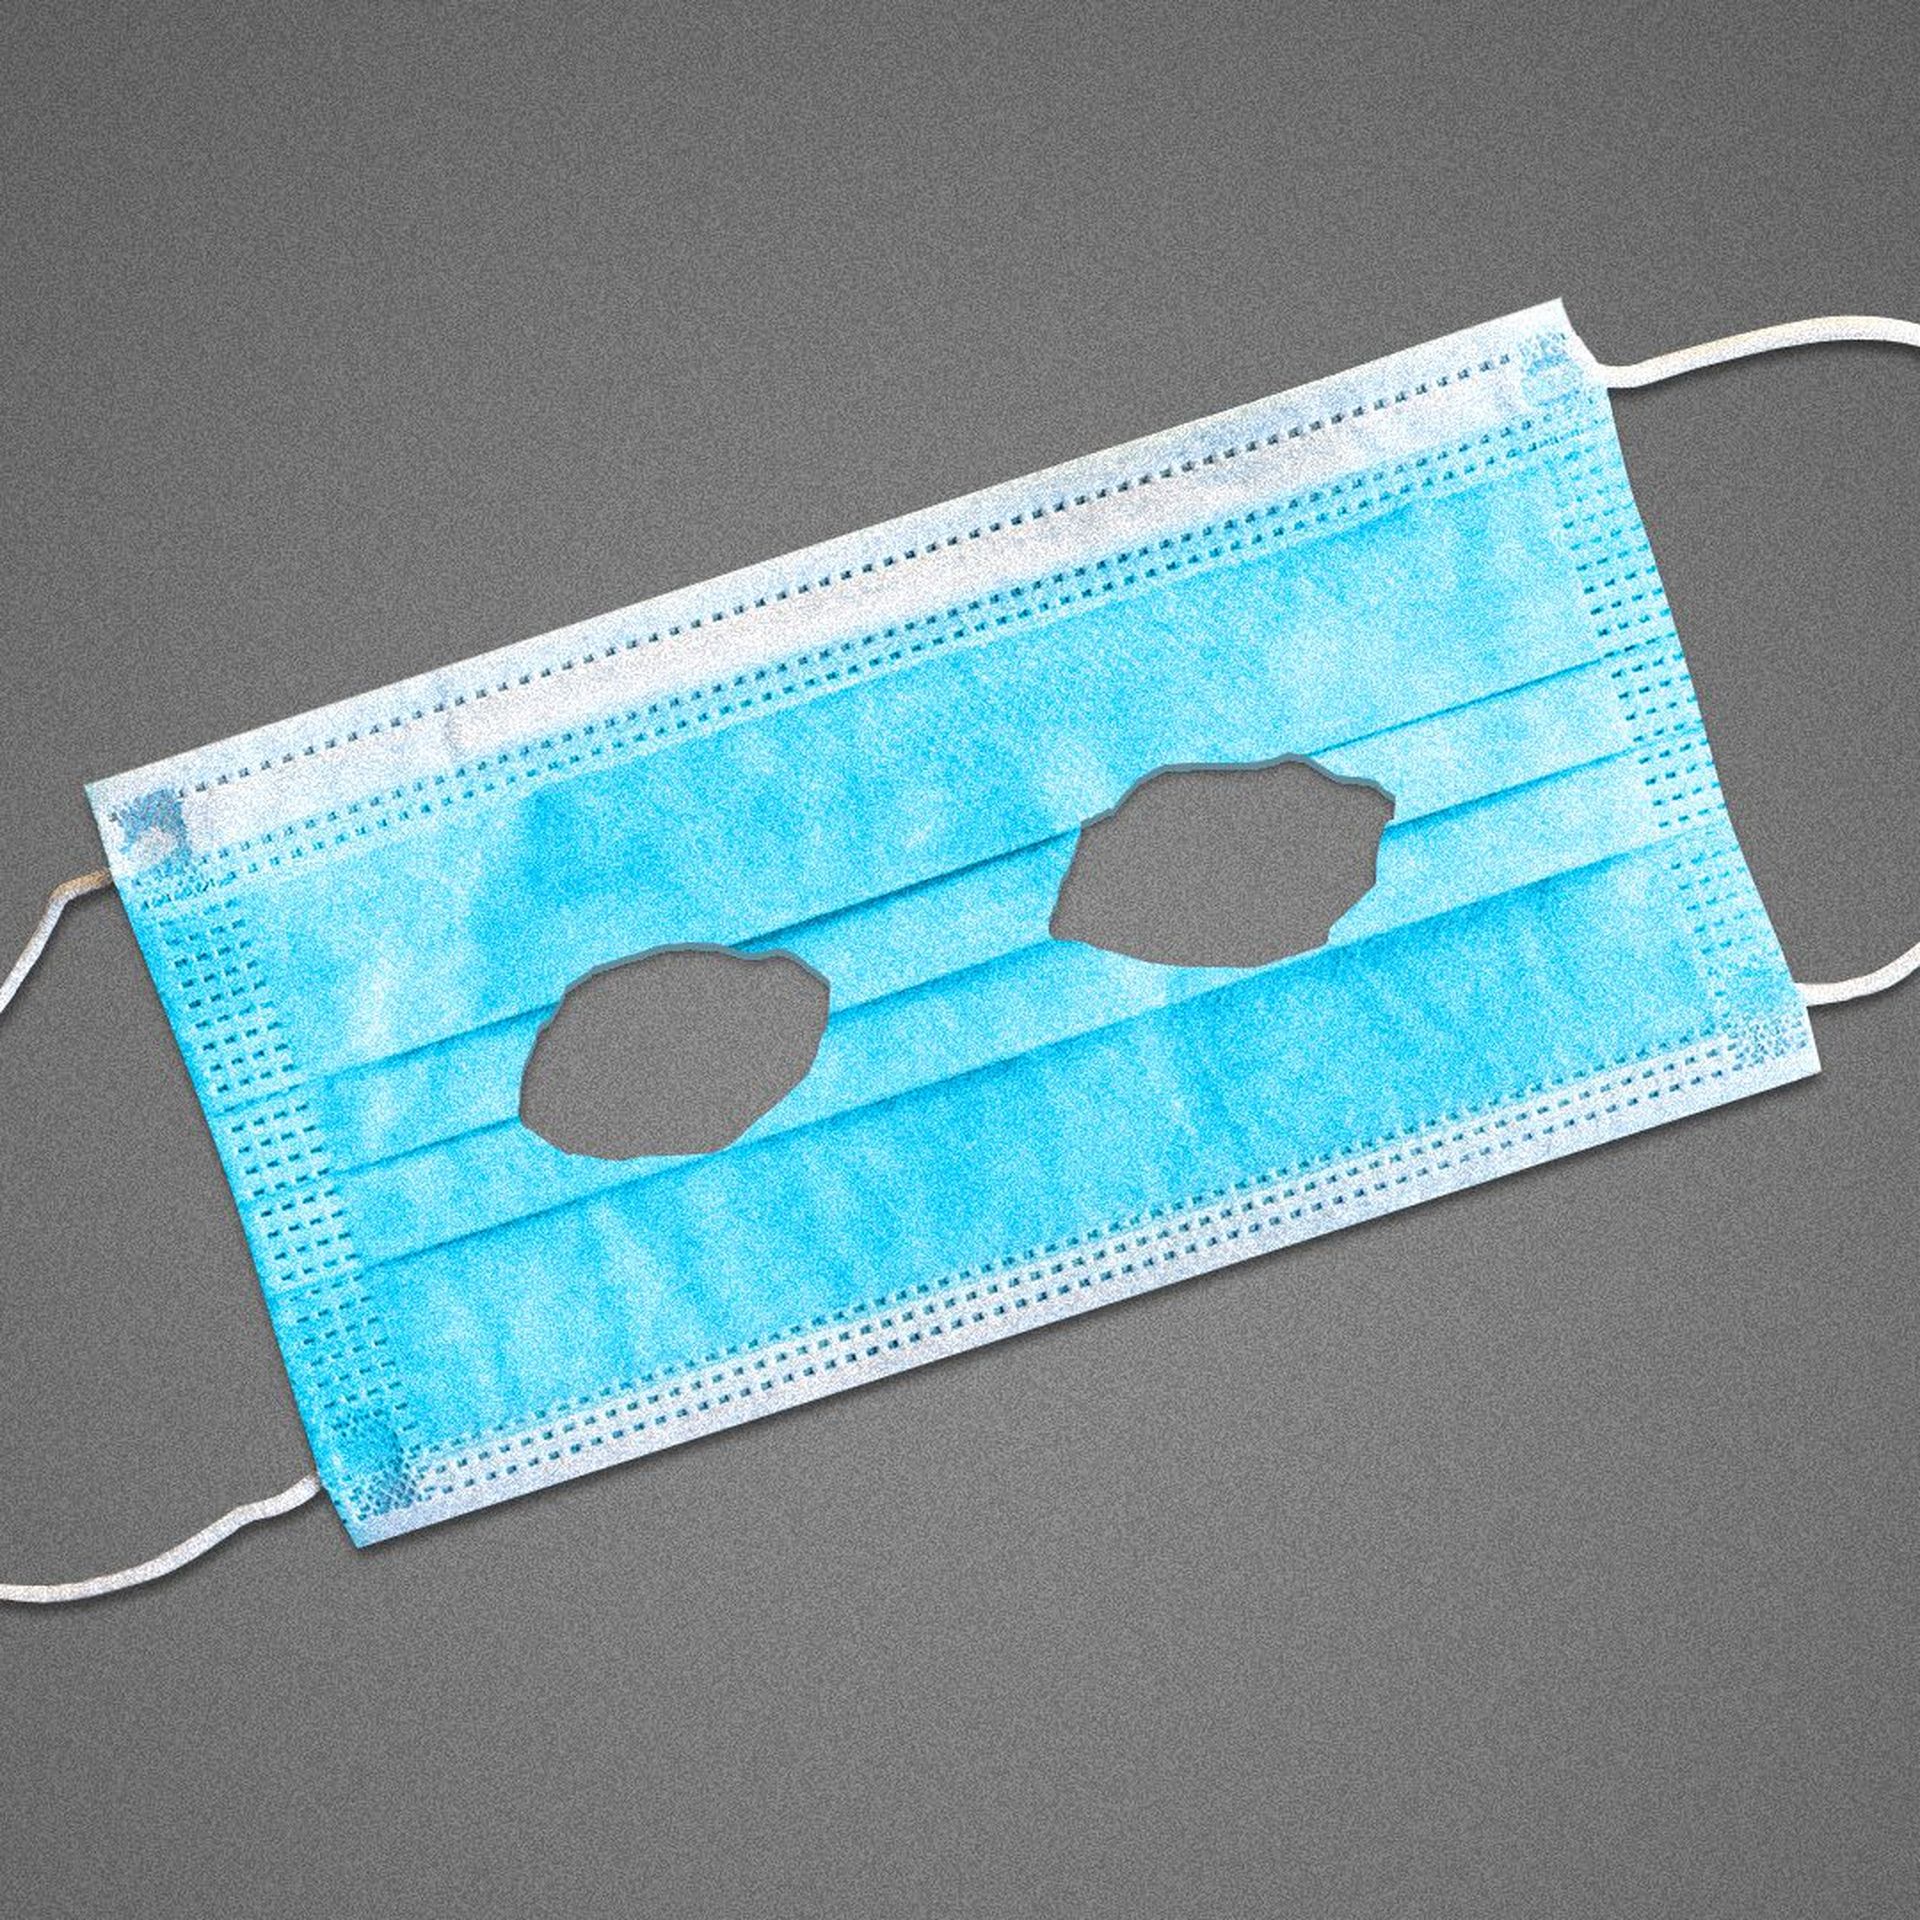 Illustration of a surgical mask with eye holes cut out. 